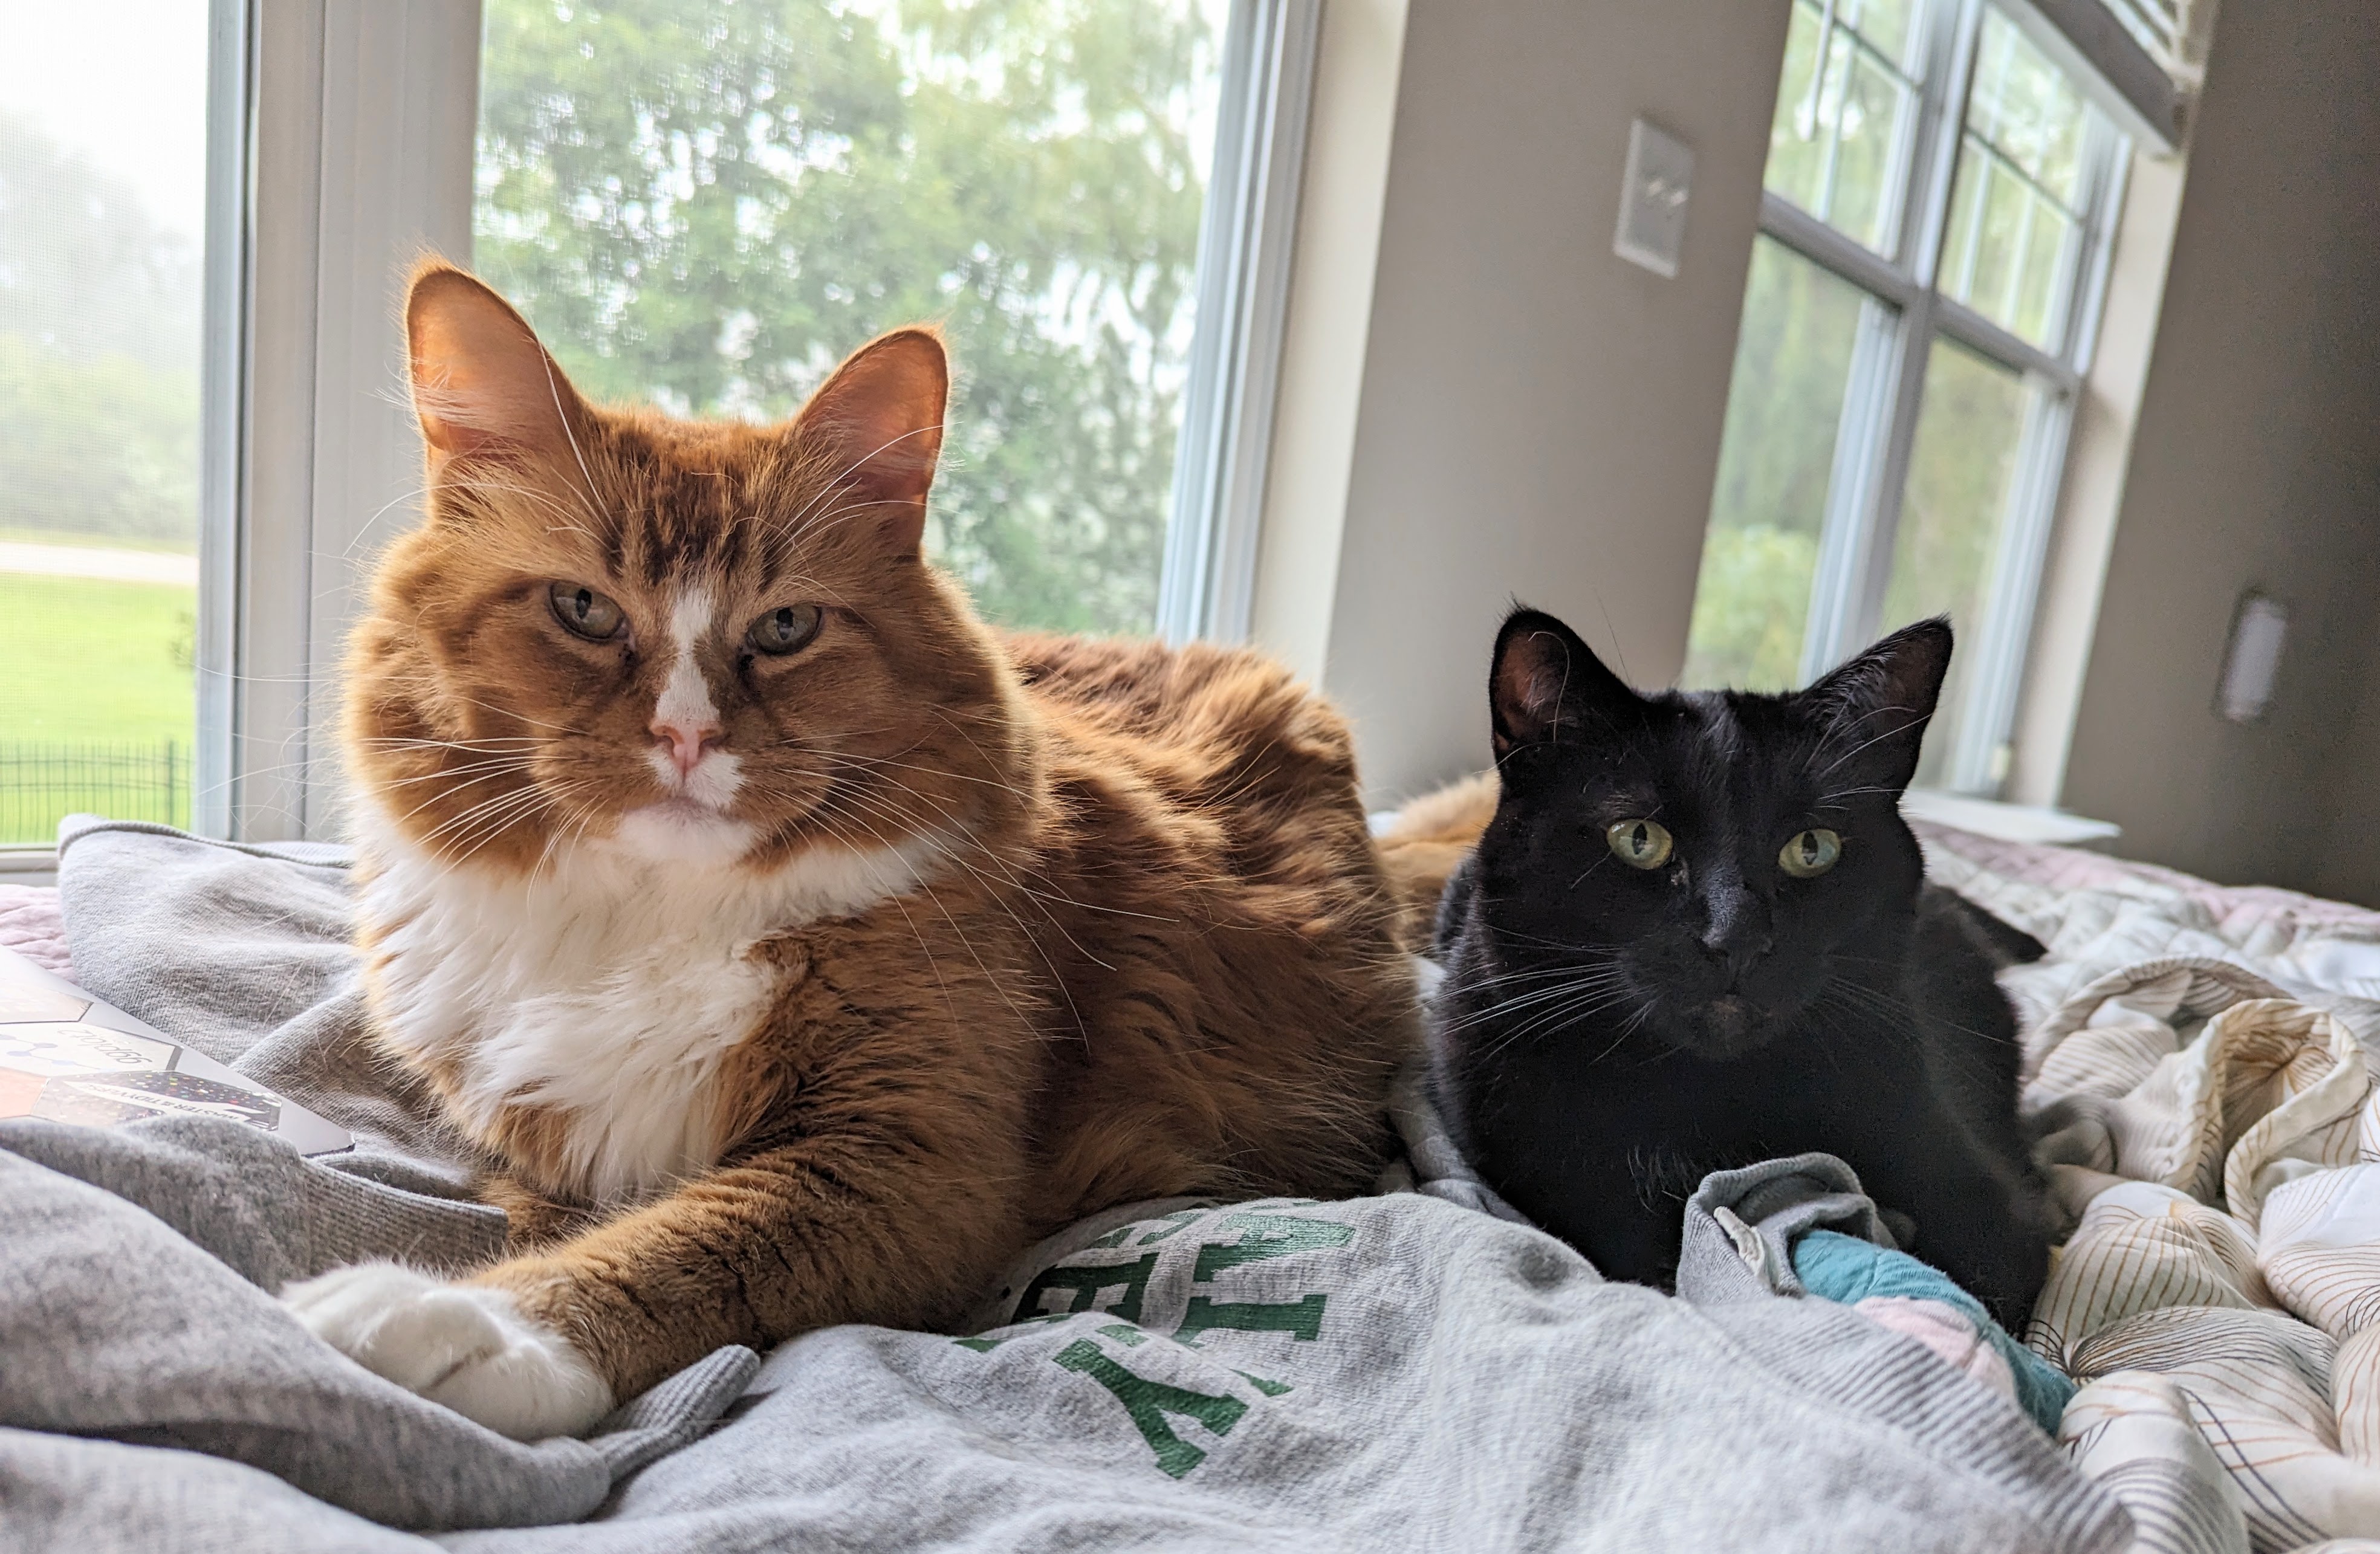 A close-up photo of two cats sitting side-by-side on a blanket. Jinx, an orange and white tabby with a medium-length coat sits on the left, gazing directly into the camera. Luna, a short-haired black cat, sits on the right, looking at something past the camera